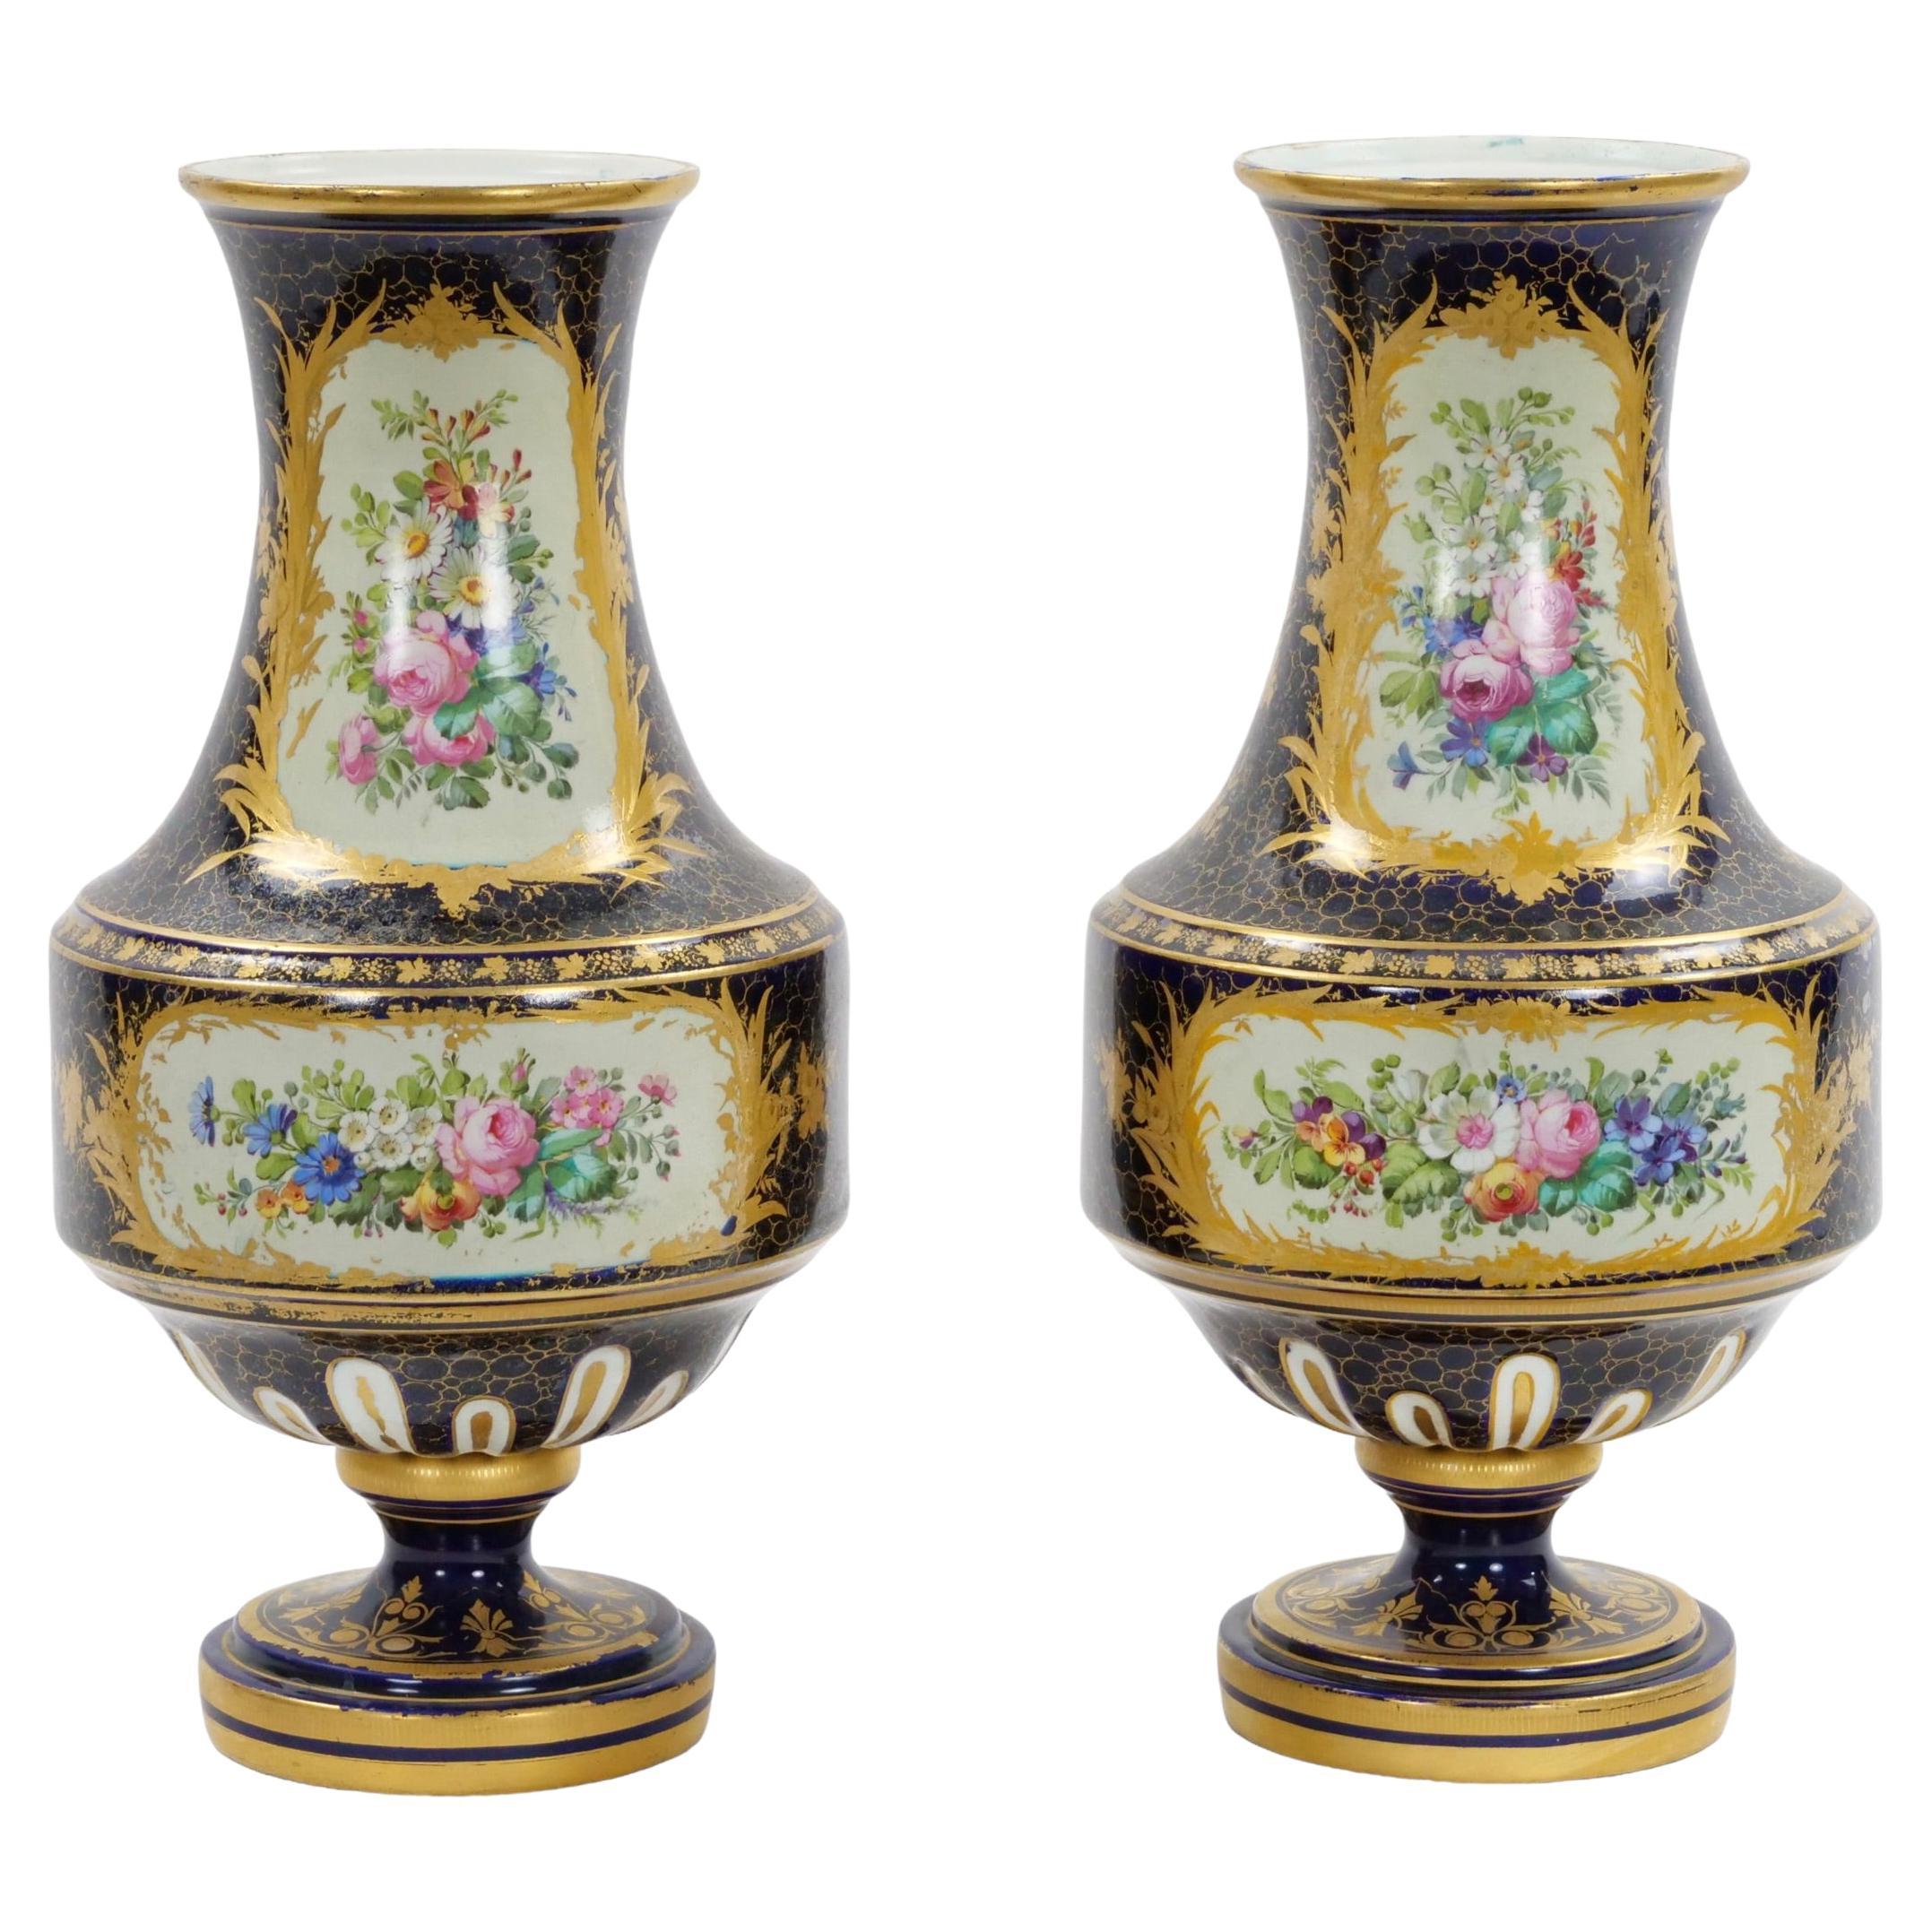 Immerse yourself in the elegance of the 19th century with this exquisite pair of French hand-painted Sevres porcelain vases. Reflecting the opulent Louis XV style, these vases are not only decorative pieces but also windows into a world of artistic